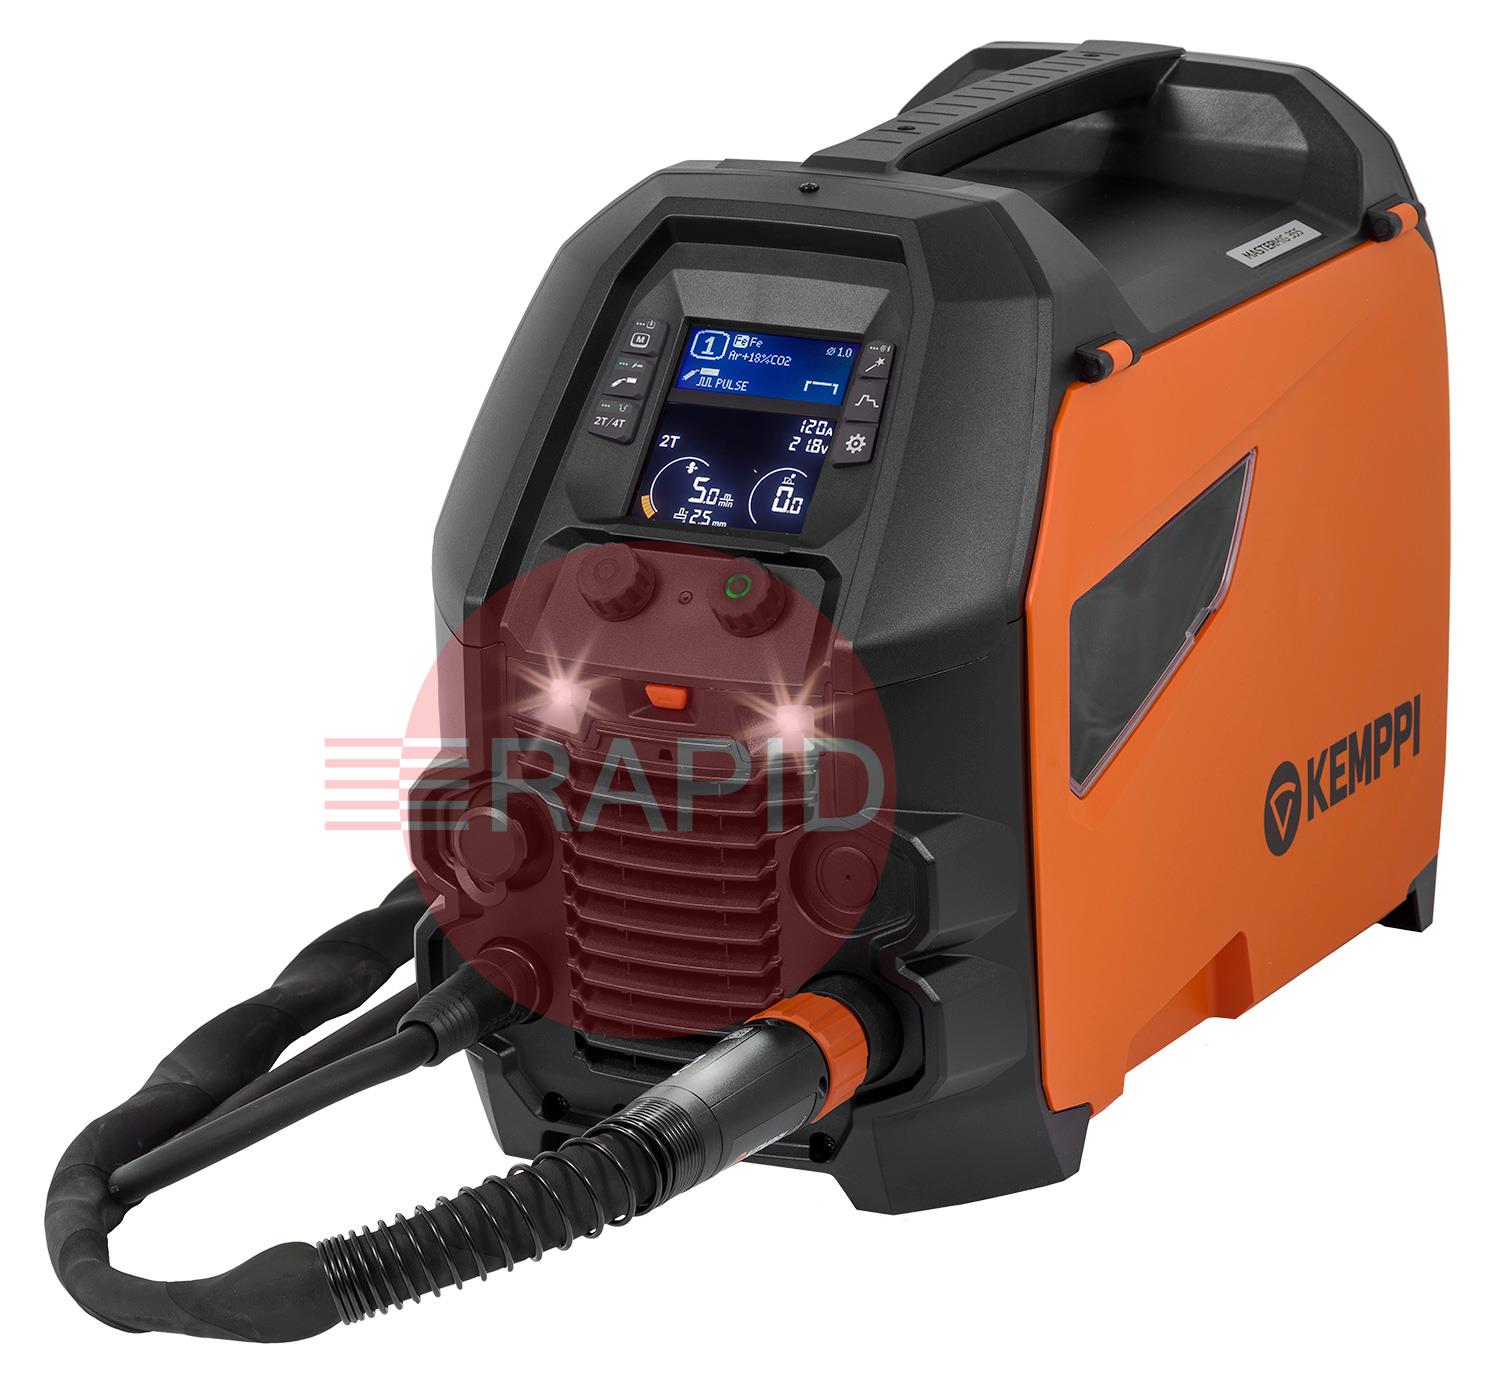 P505GXE3  Kemppi Master M 355G Pulse MIG Welder Air Cooled Package, with GXe 305G 3.5m Torch - 400v, 3ph